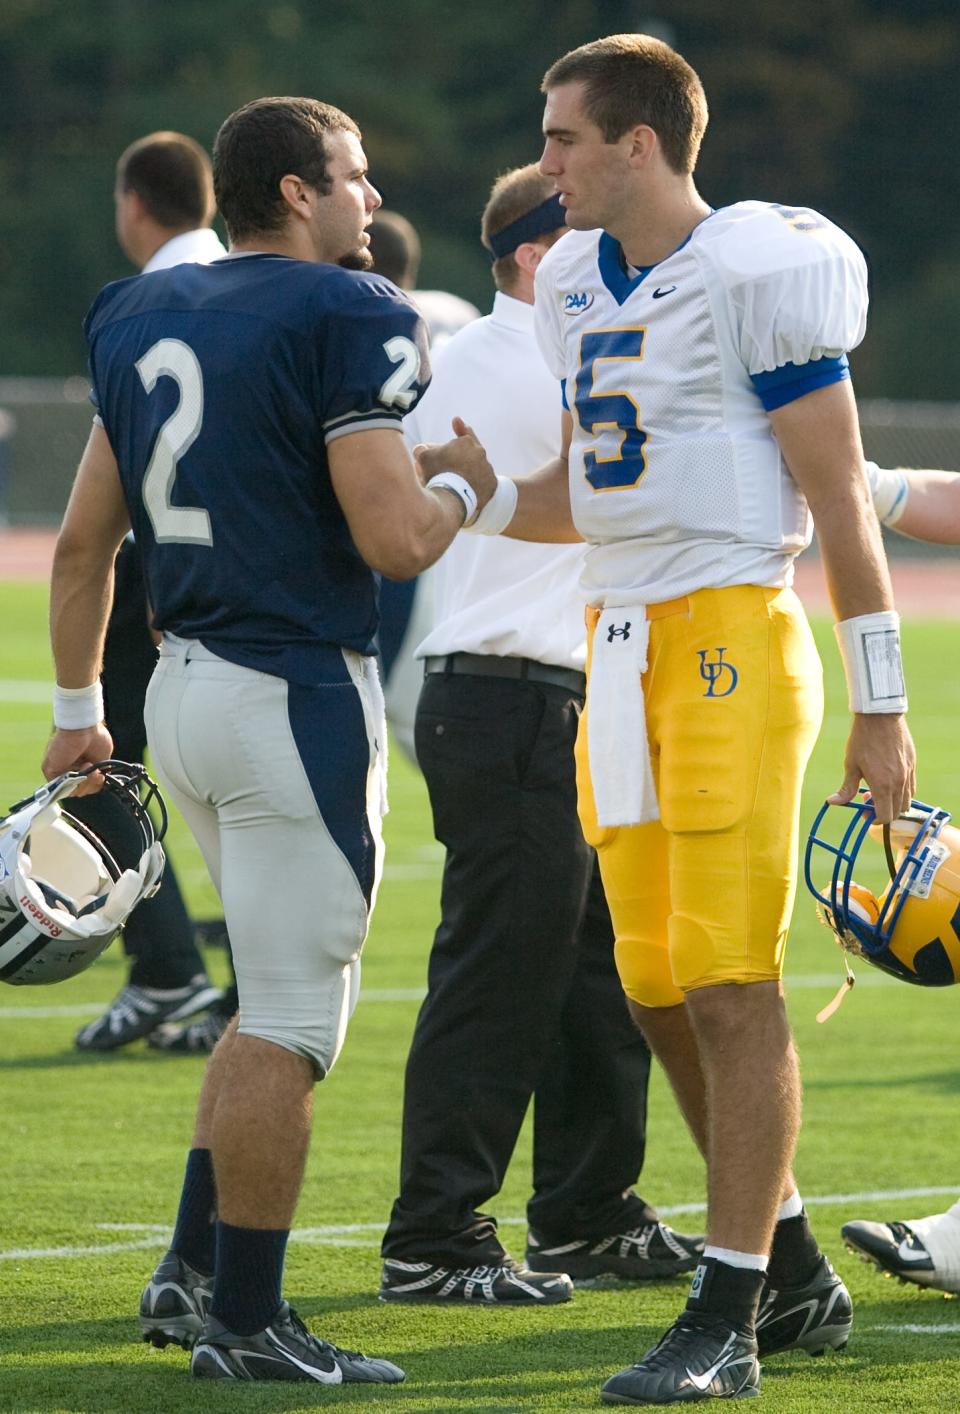 Former New Hampshire quarterback Ricky Santos (left) and former Delaware quarterback Joe Flacco greet each other after a college football game in 2007.